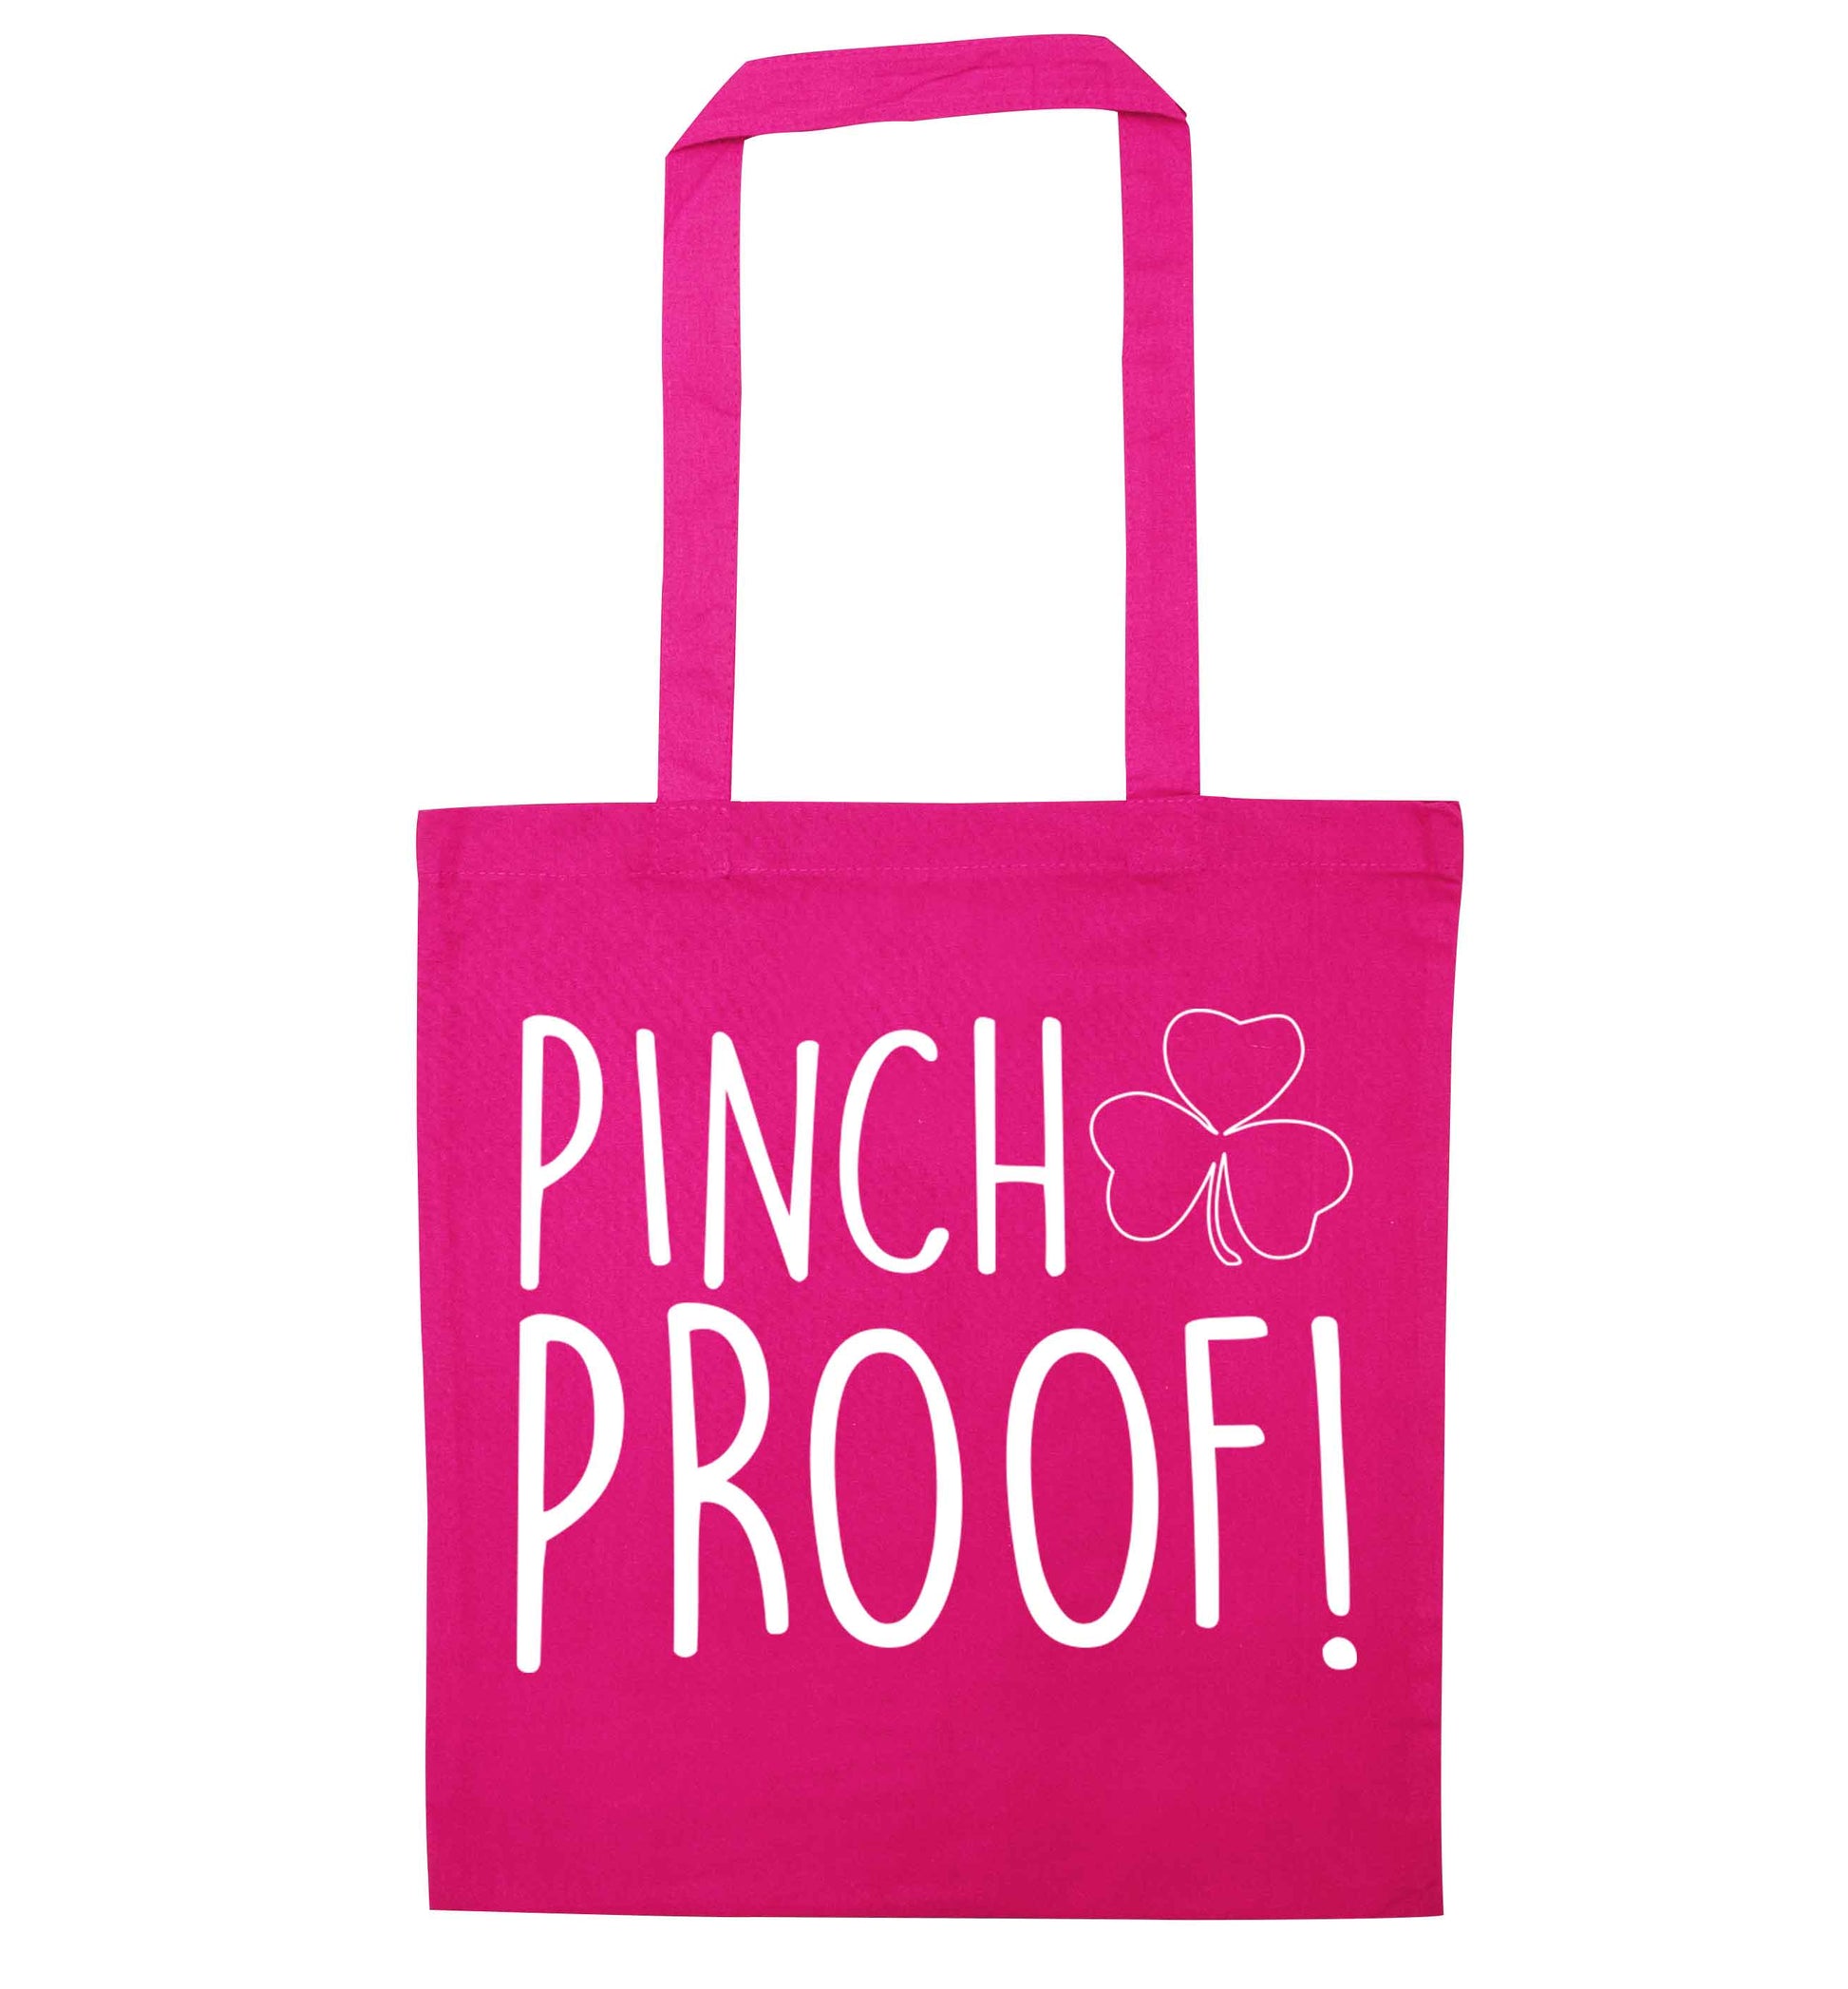 Pinch Proof pink tote bag